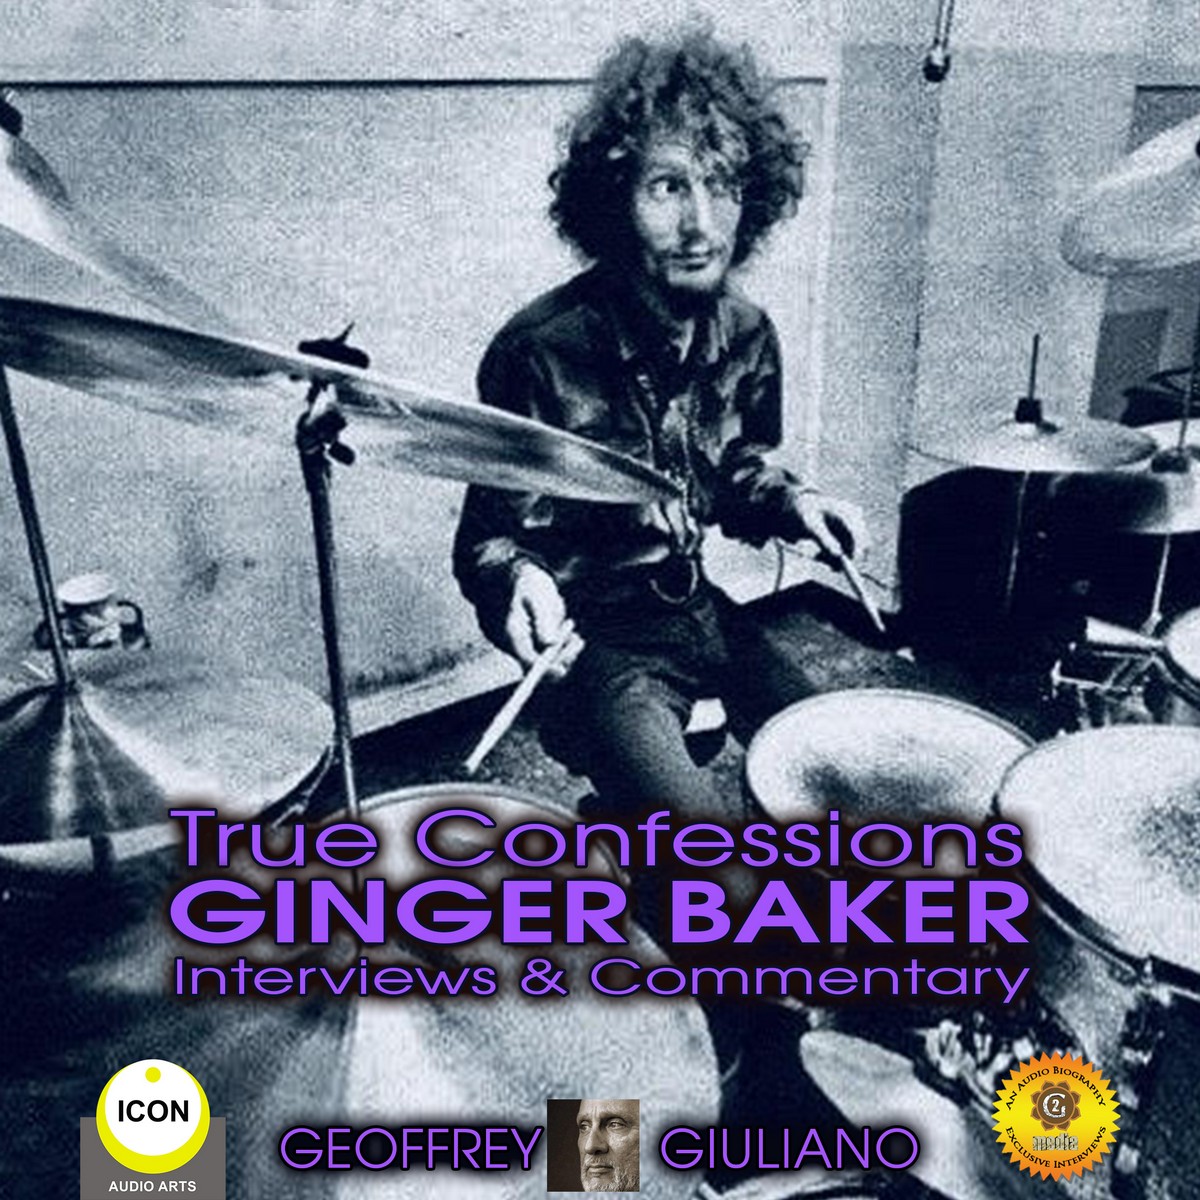 True Confessions Ginger Baker Interviews & Commentary